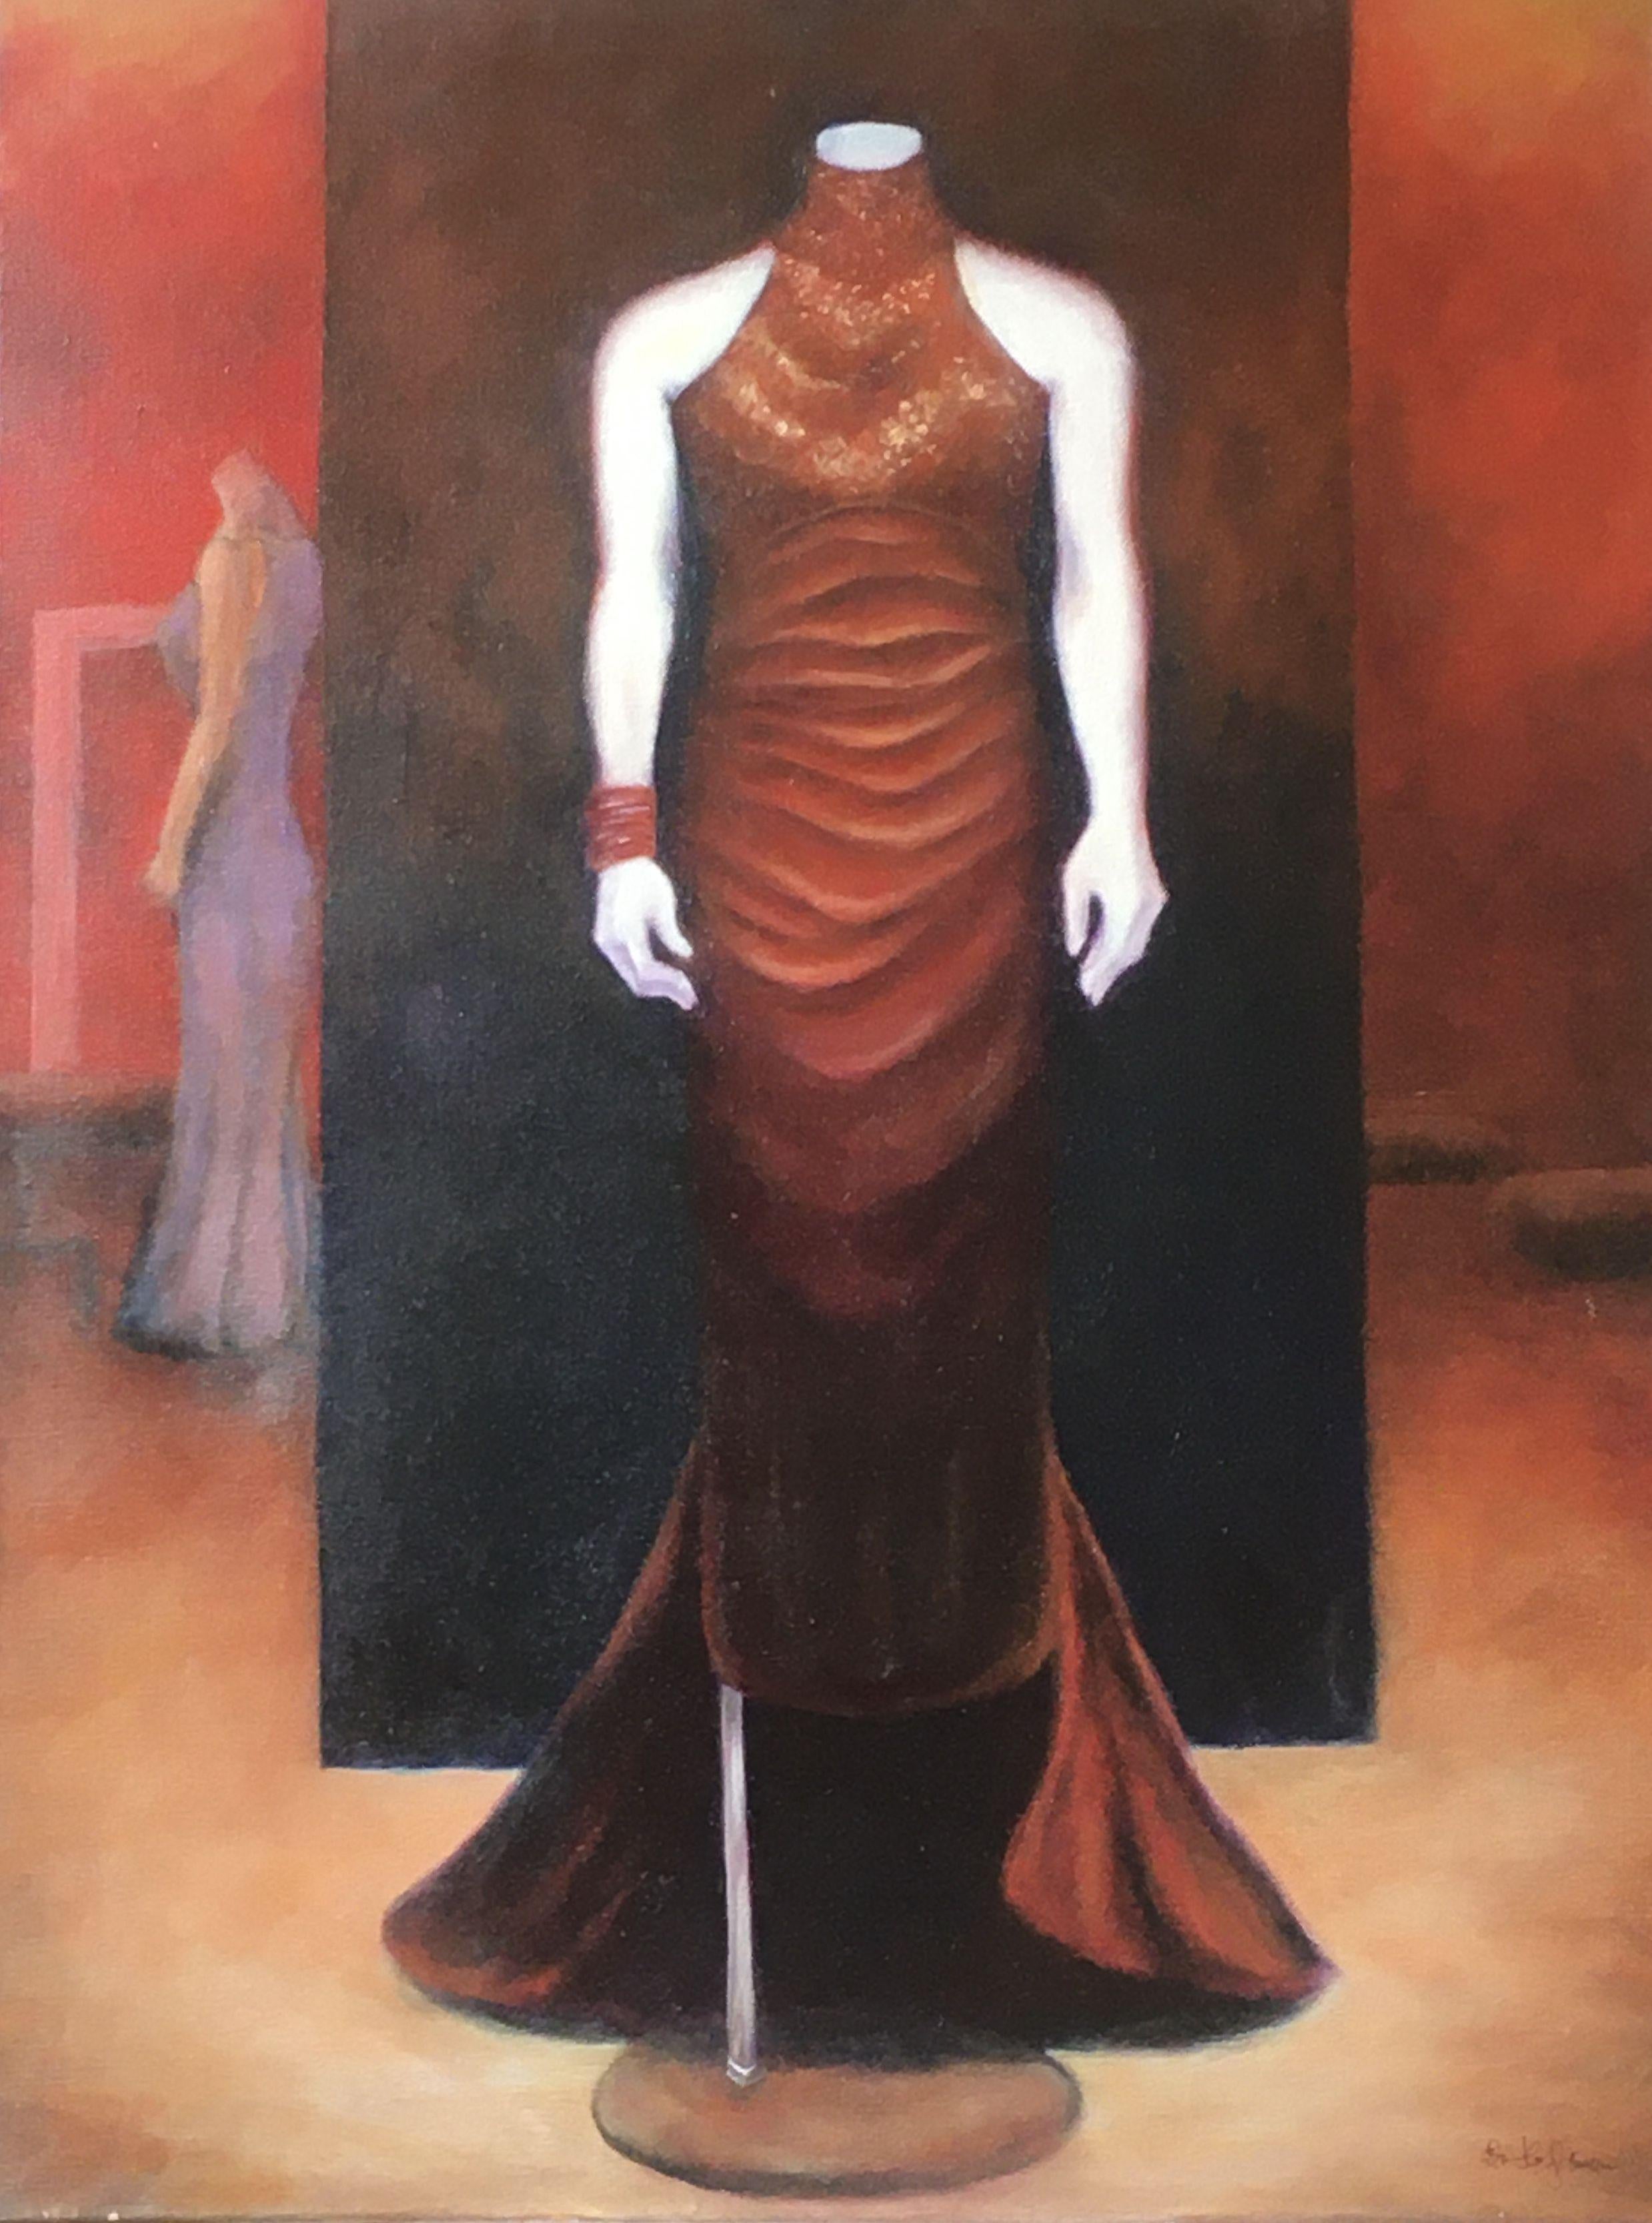 Fashion show in the window. Dreaming about party, dance, good time. Sexy red dress for an elegant dinner. Elegance, beauty. :: Painting :: Realism :: This piece comes with an official certificate of authenticity signed by the artist :: Ready to